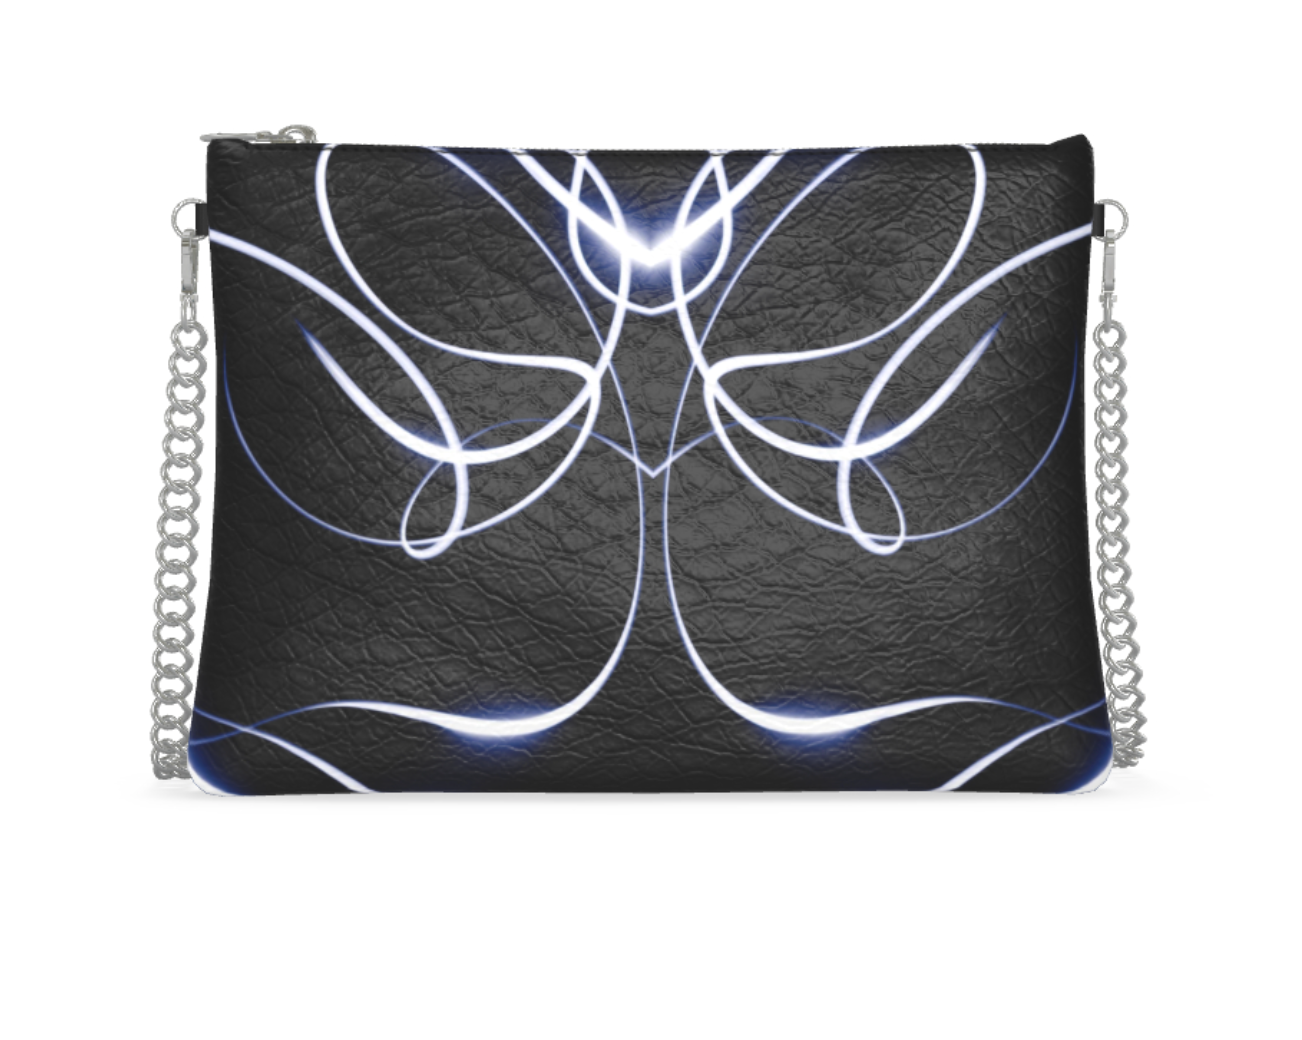 UNTITLED x Indira Cesarine "Lumière" Series Black and Blue Kaleidoscopic Leather Crossbody Bag with Silver Chain - Limited Edition